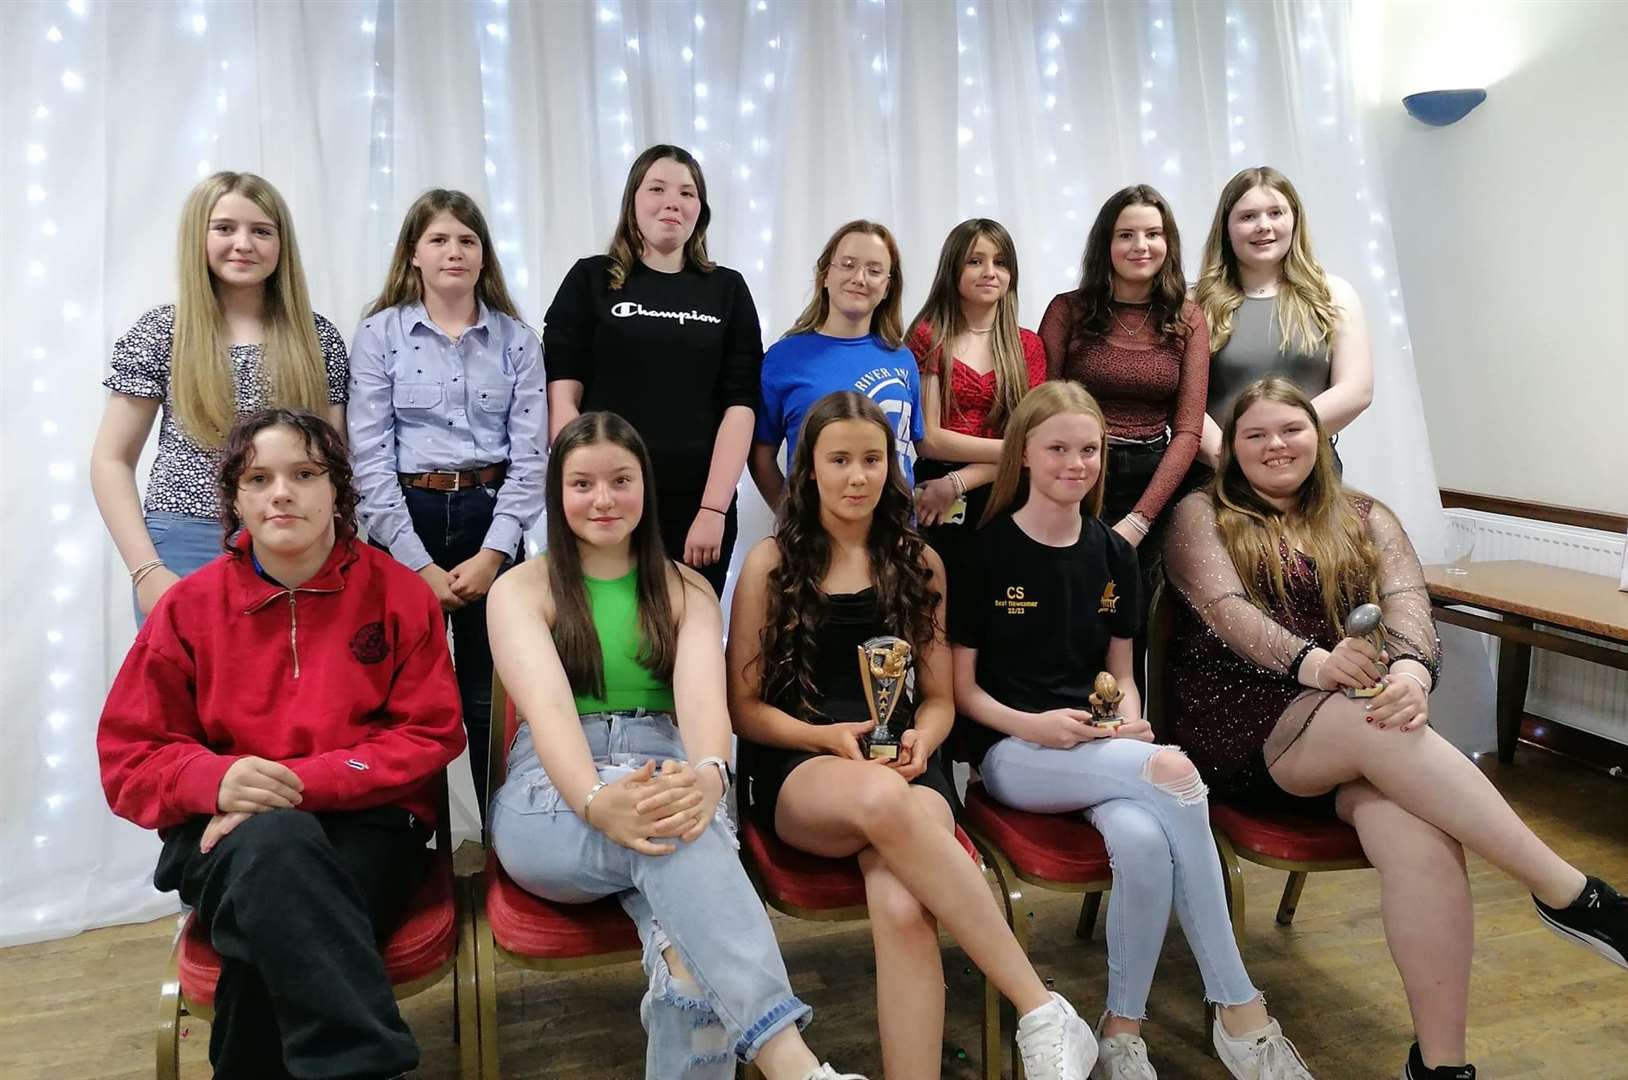 Under-14s at the annual awards held by the Caithness Rugby Football Club girls' section.